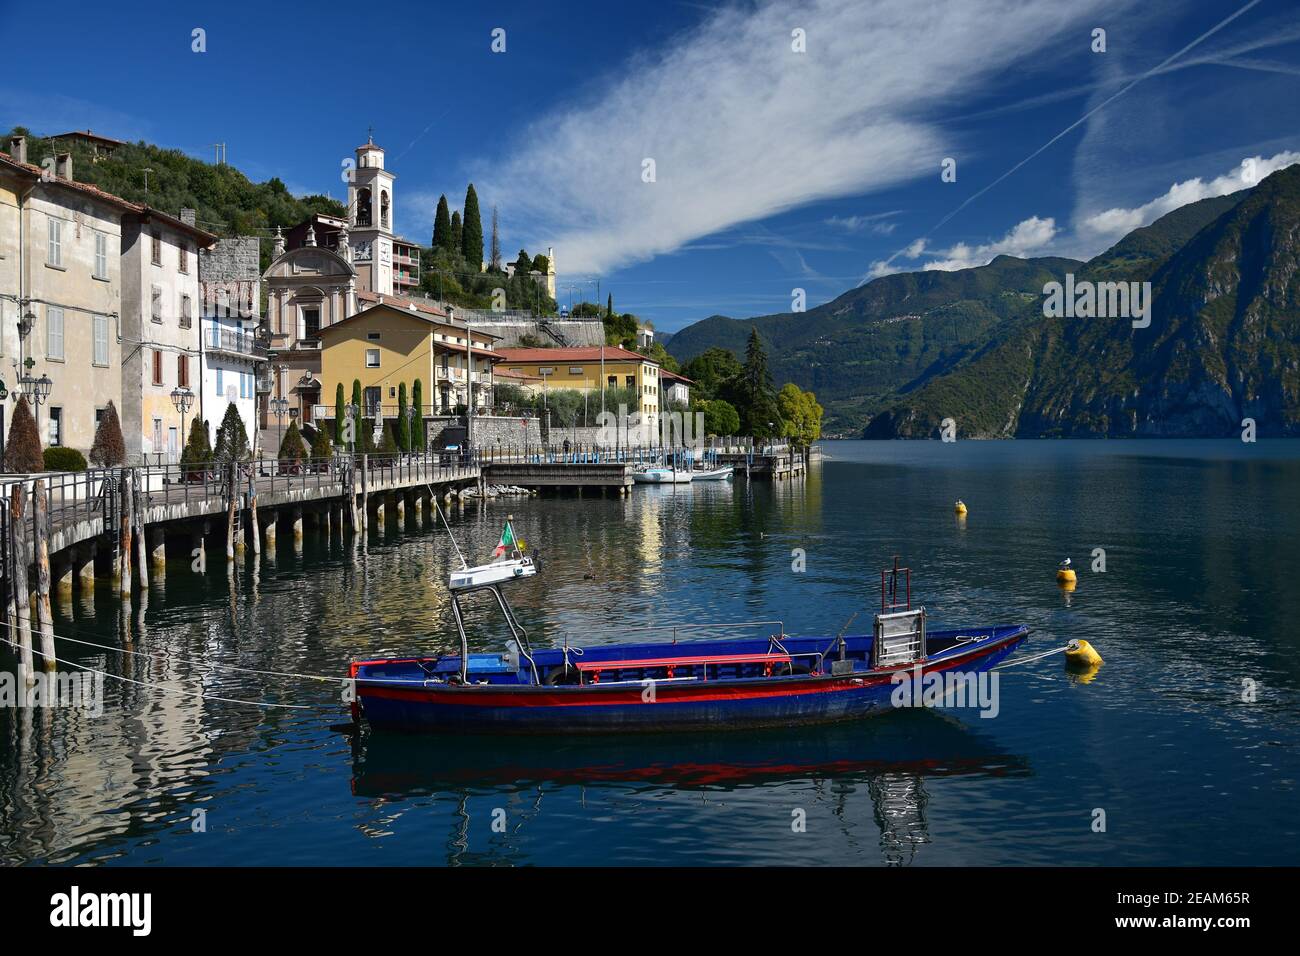 The small town Riva di Solto at Lake Iseo, Lombardy, Italy. A boat in front. Stock Photo